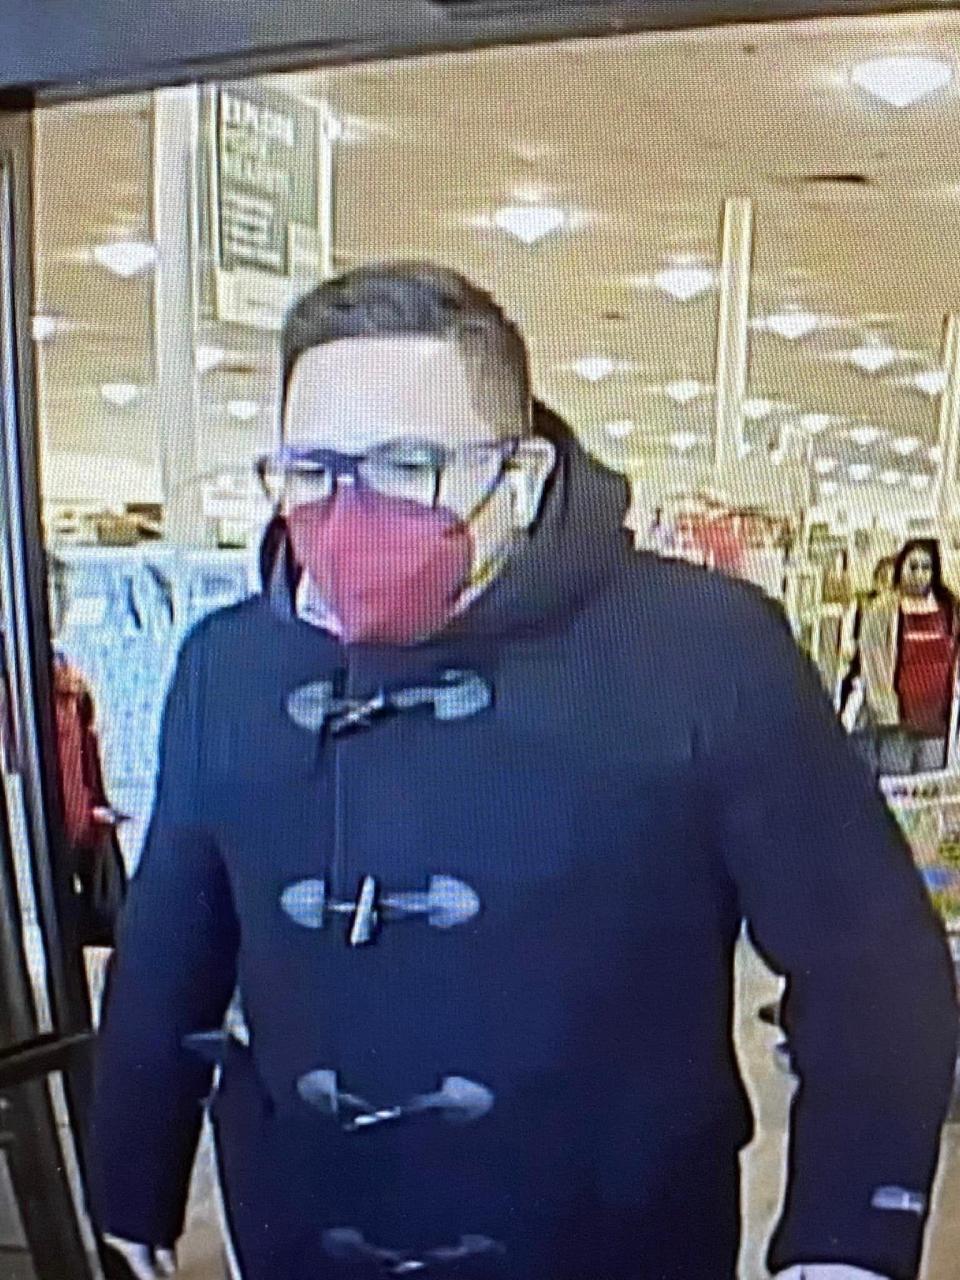 Norwell police are asking for the public's help in identifying the suspects they believe are responsible for several wallet thefts from purses in stores around town.